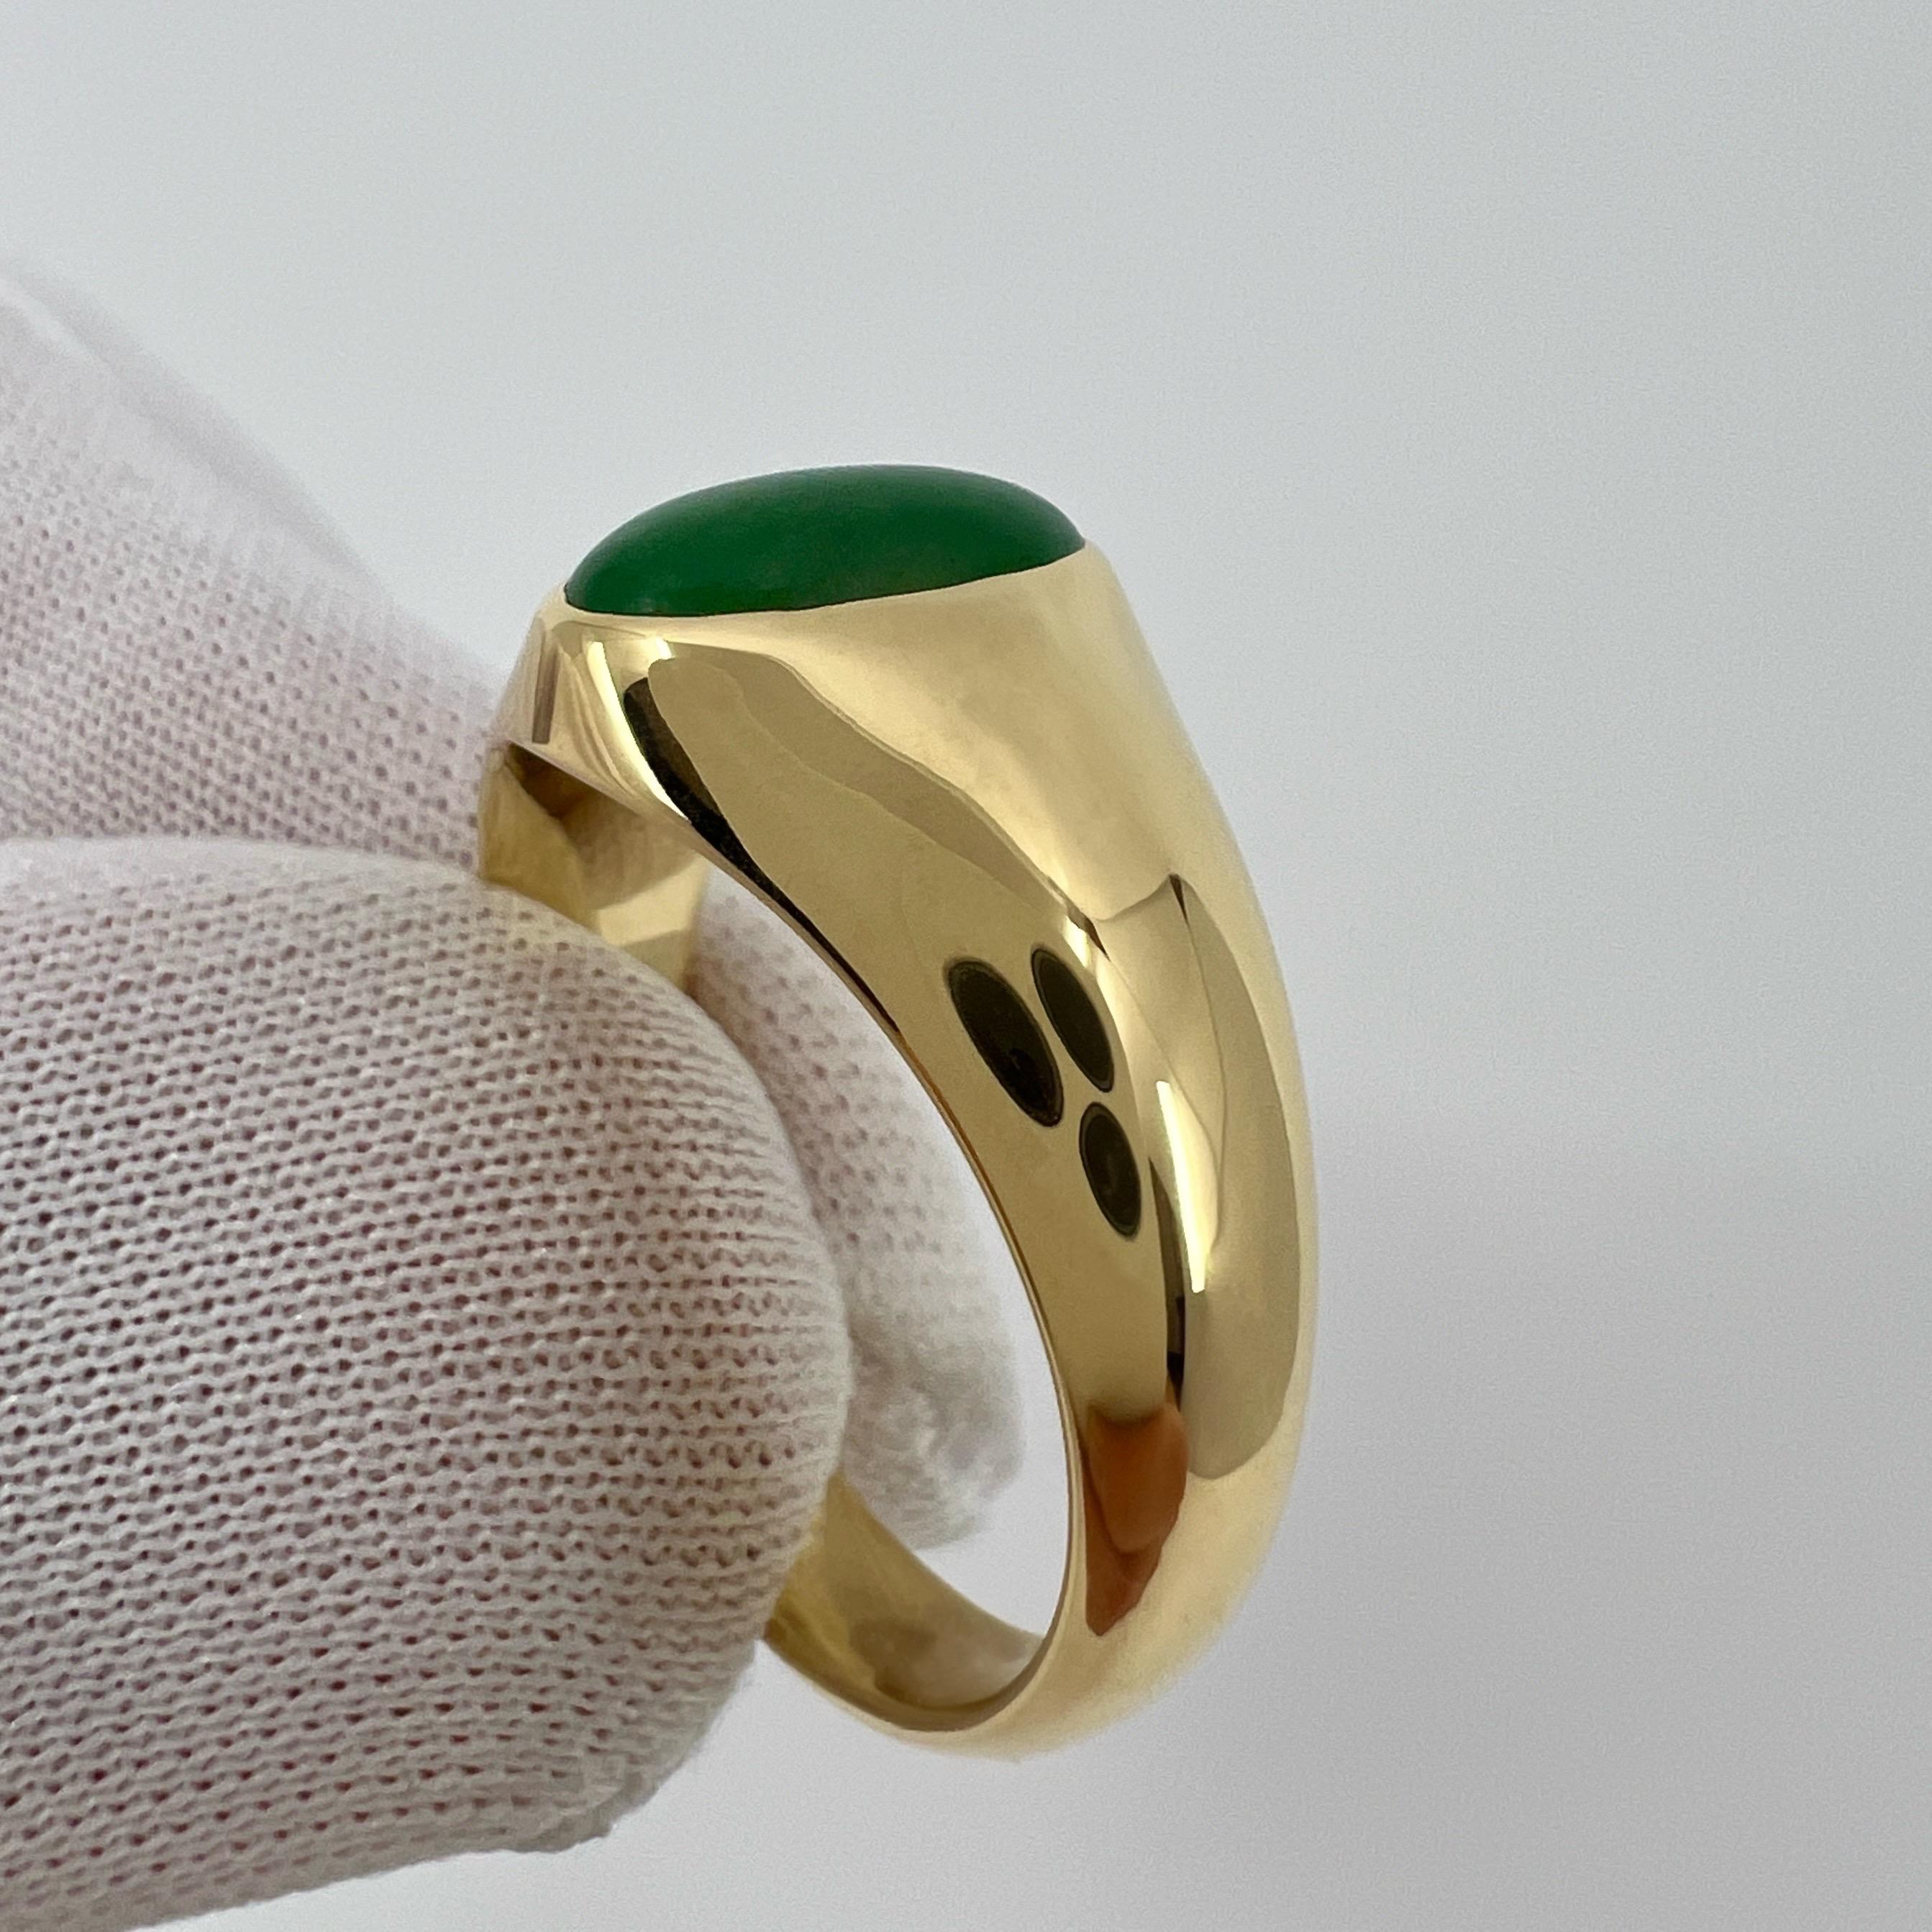 GIA Certified Jadeite A Grade Jade Oval Untreated 18k Yellow Gold Signet Ring 5